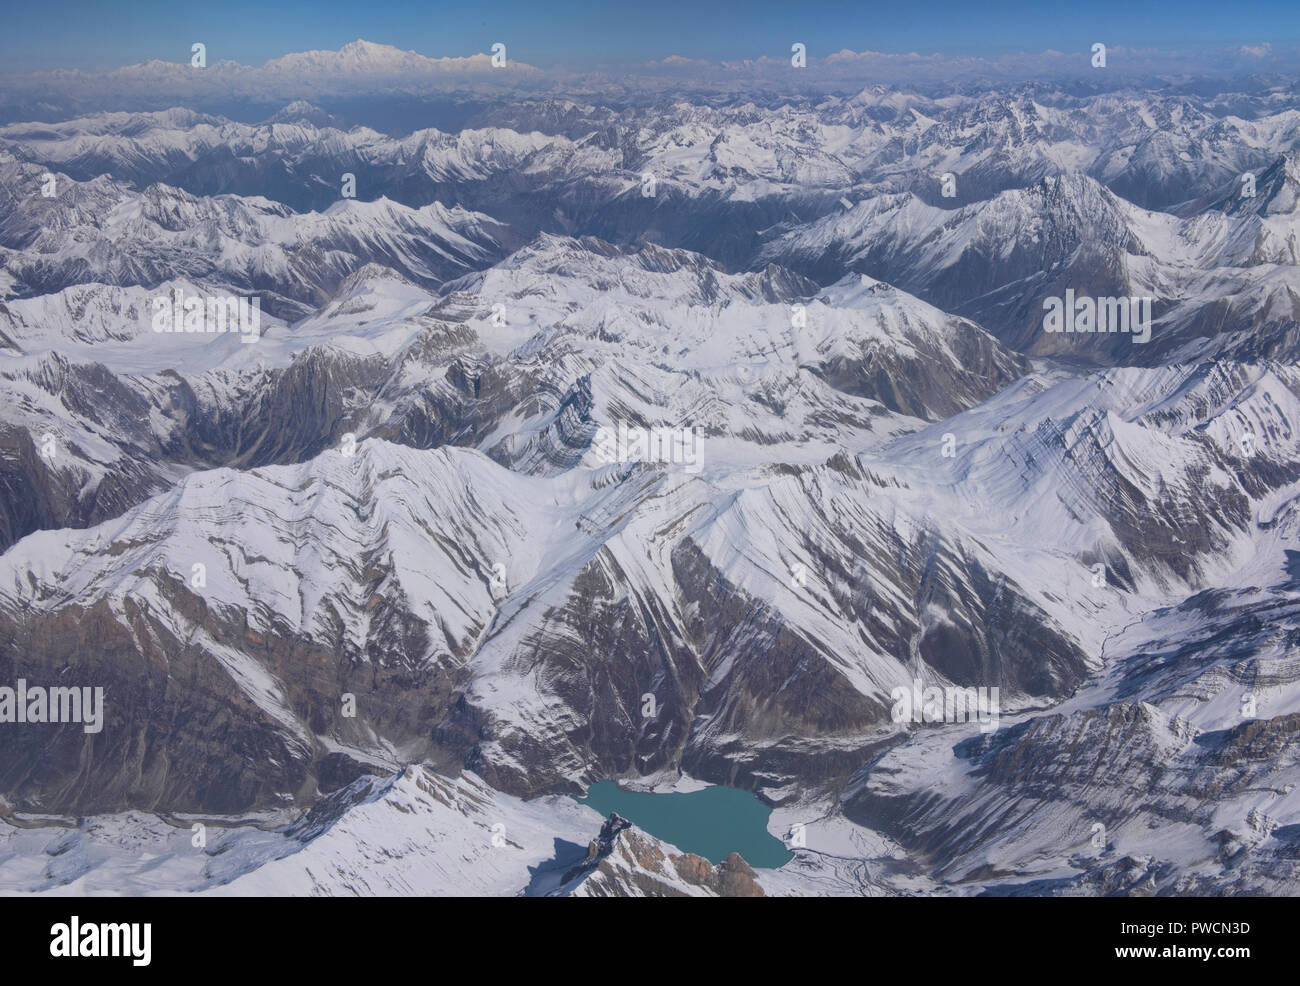 The peaks of Kashmir and Karakoram, with Tirich Mir (7708m) in the Hindu Kush seen in the back, Kashmir, India Stock Photo